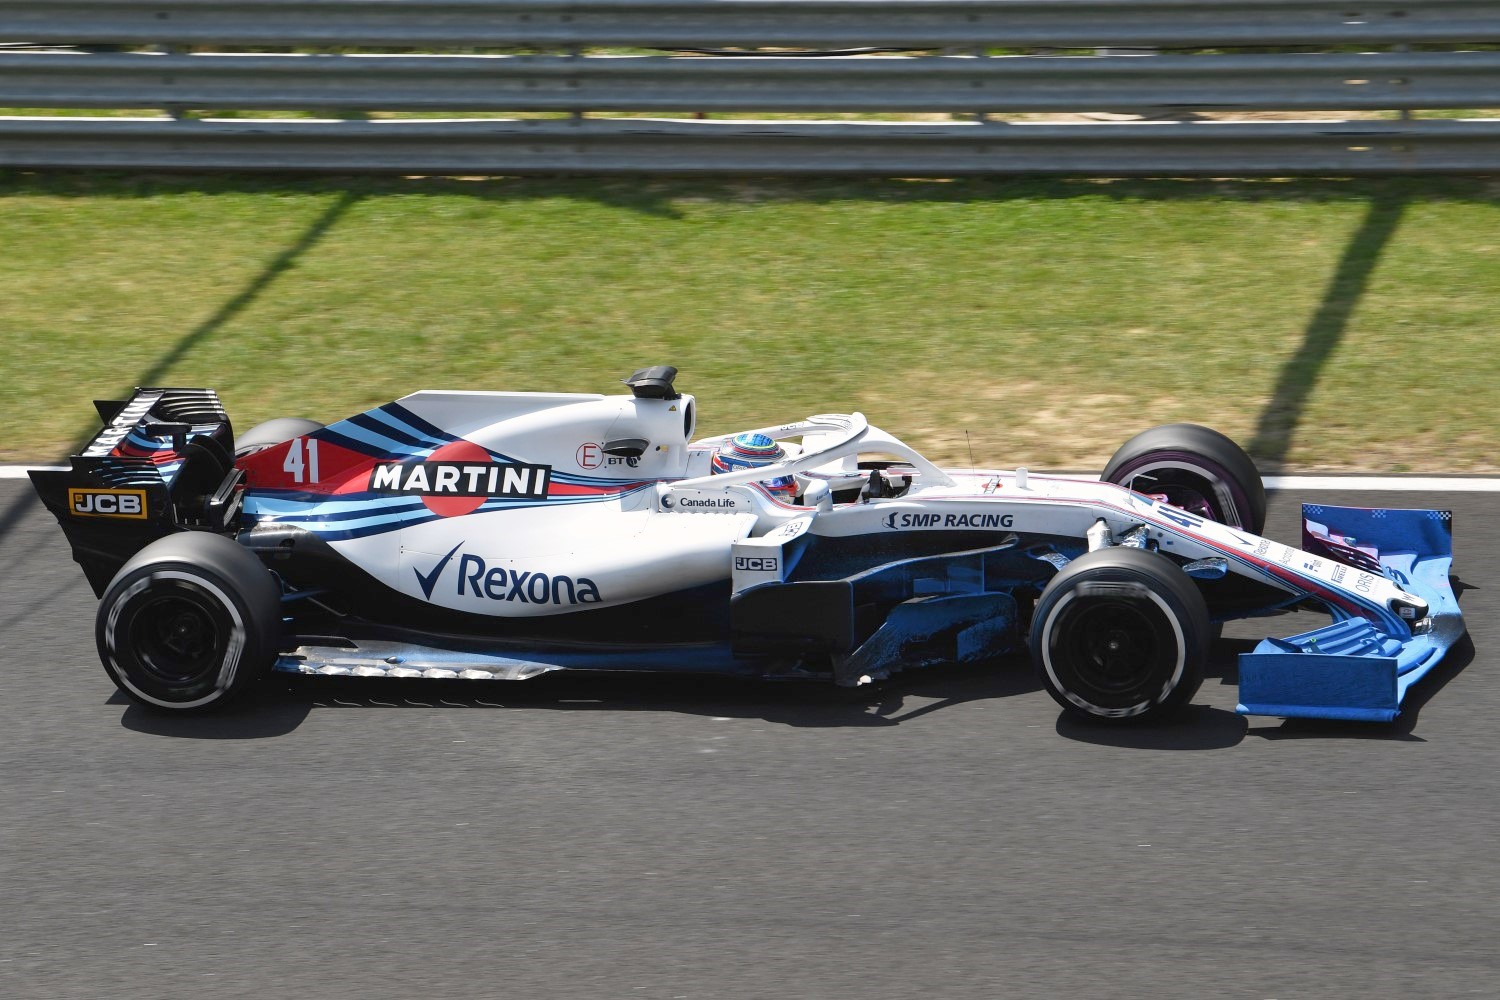 Williams tested the new, simpler, 2019 front wing